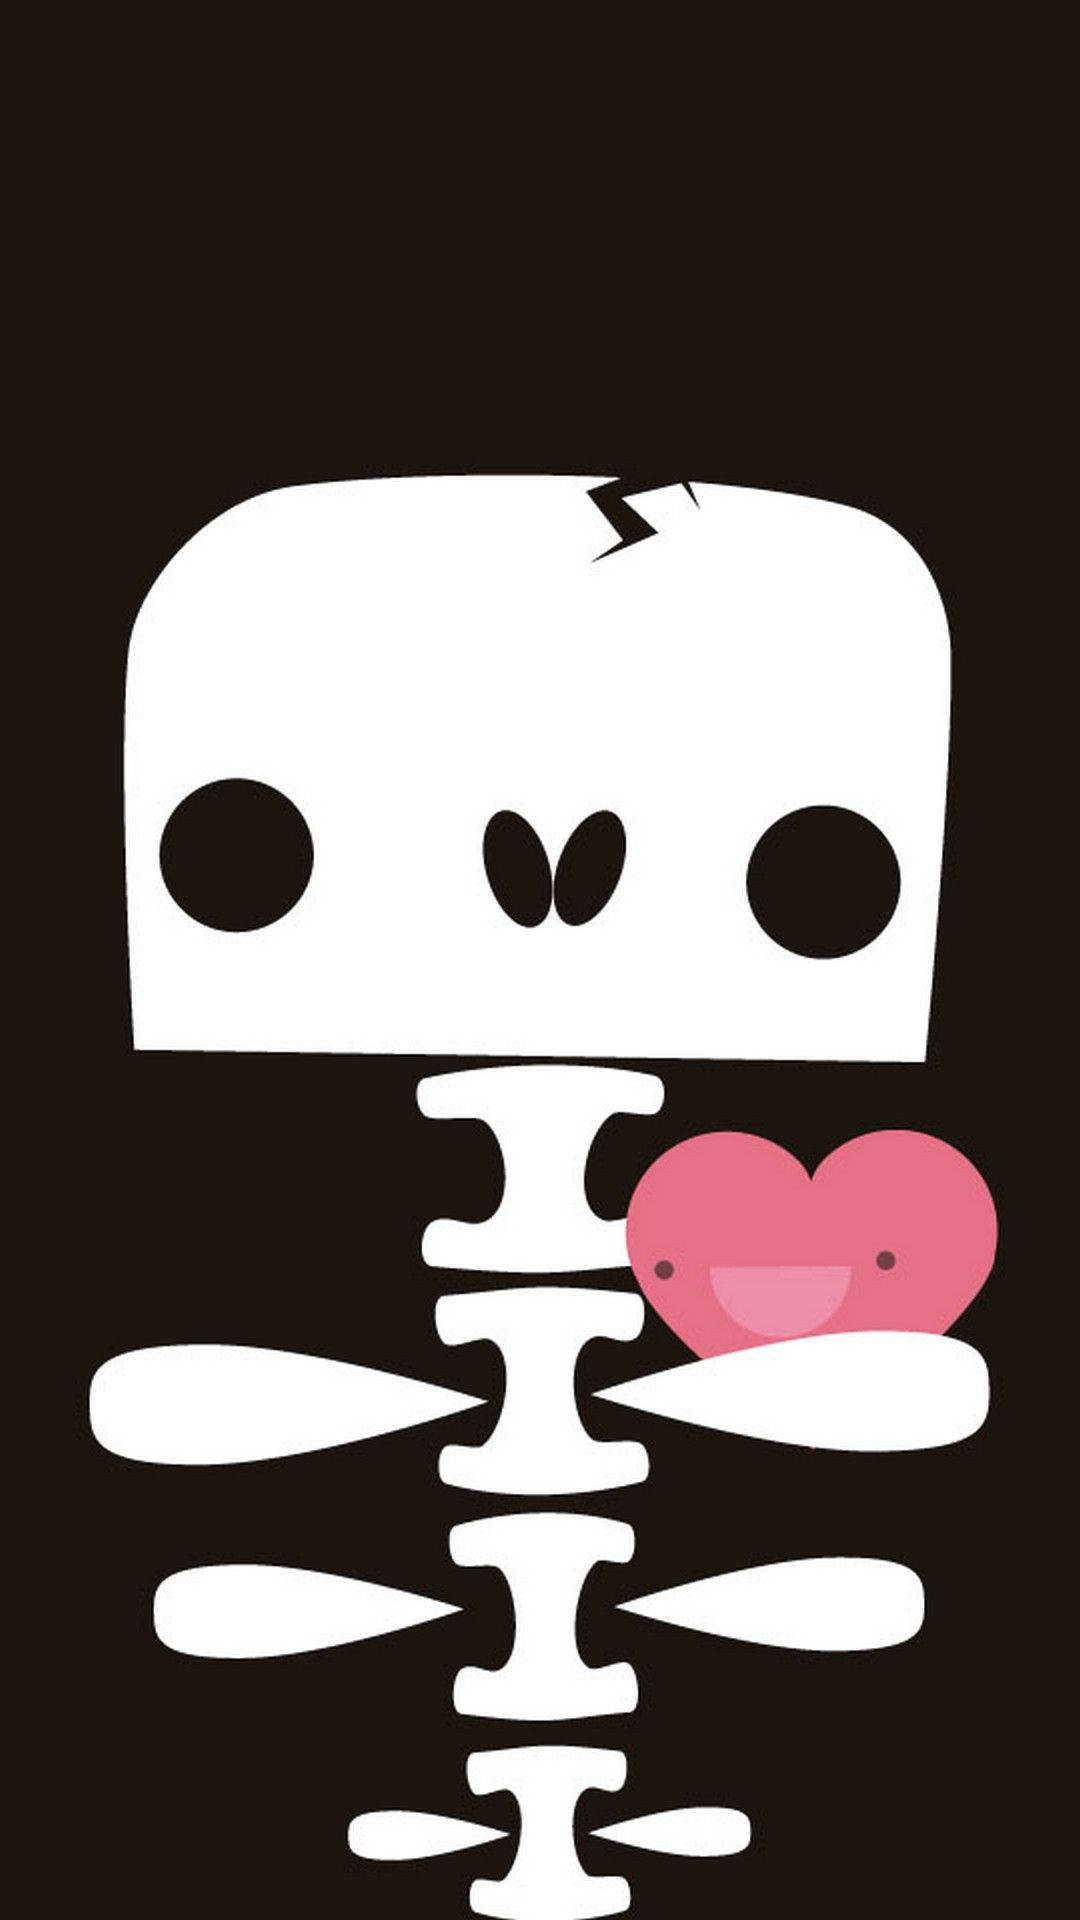 Black Cute Girly Skeleton And Heart Background